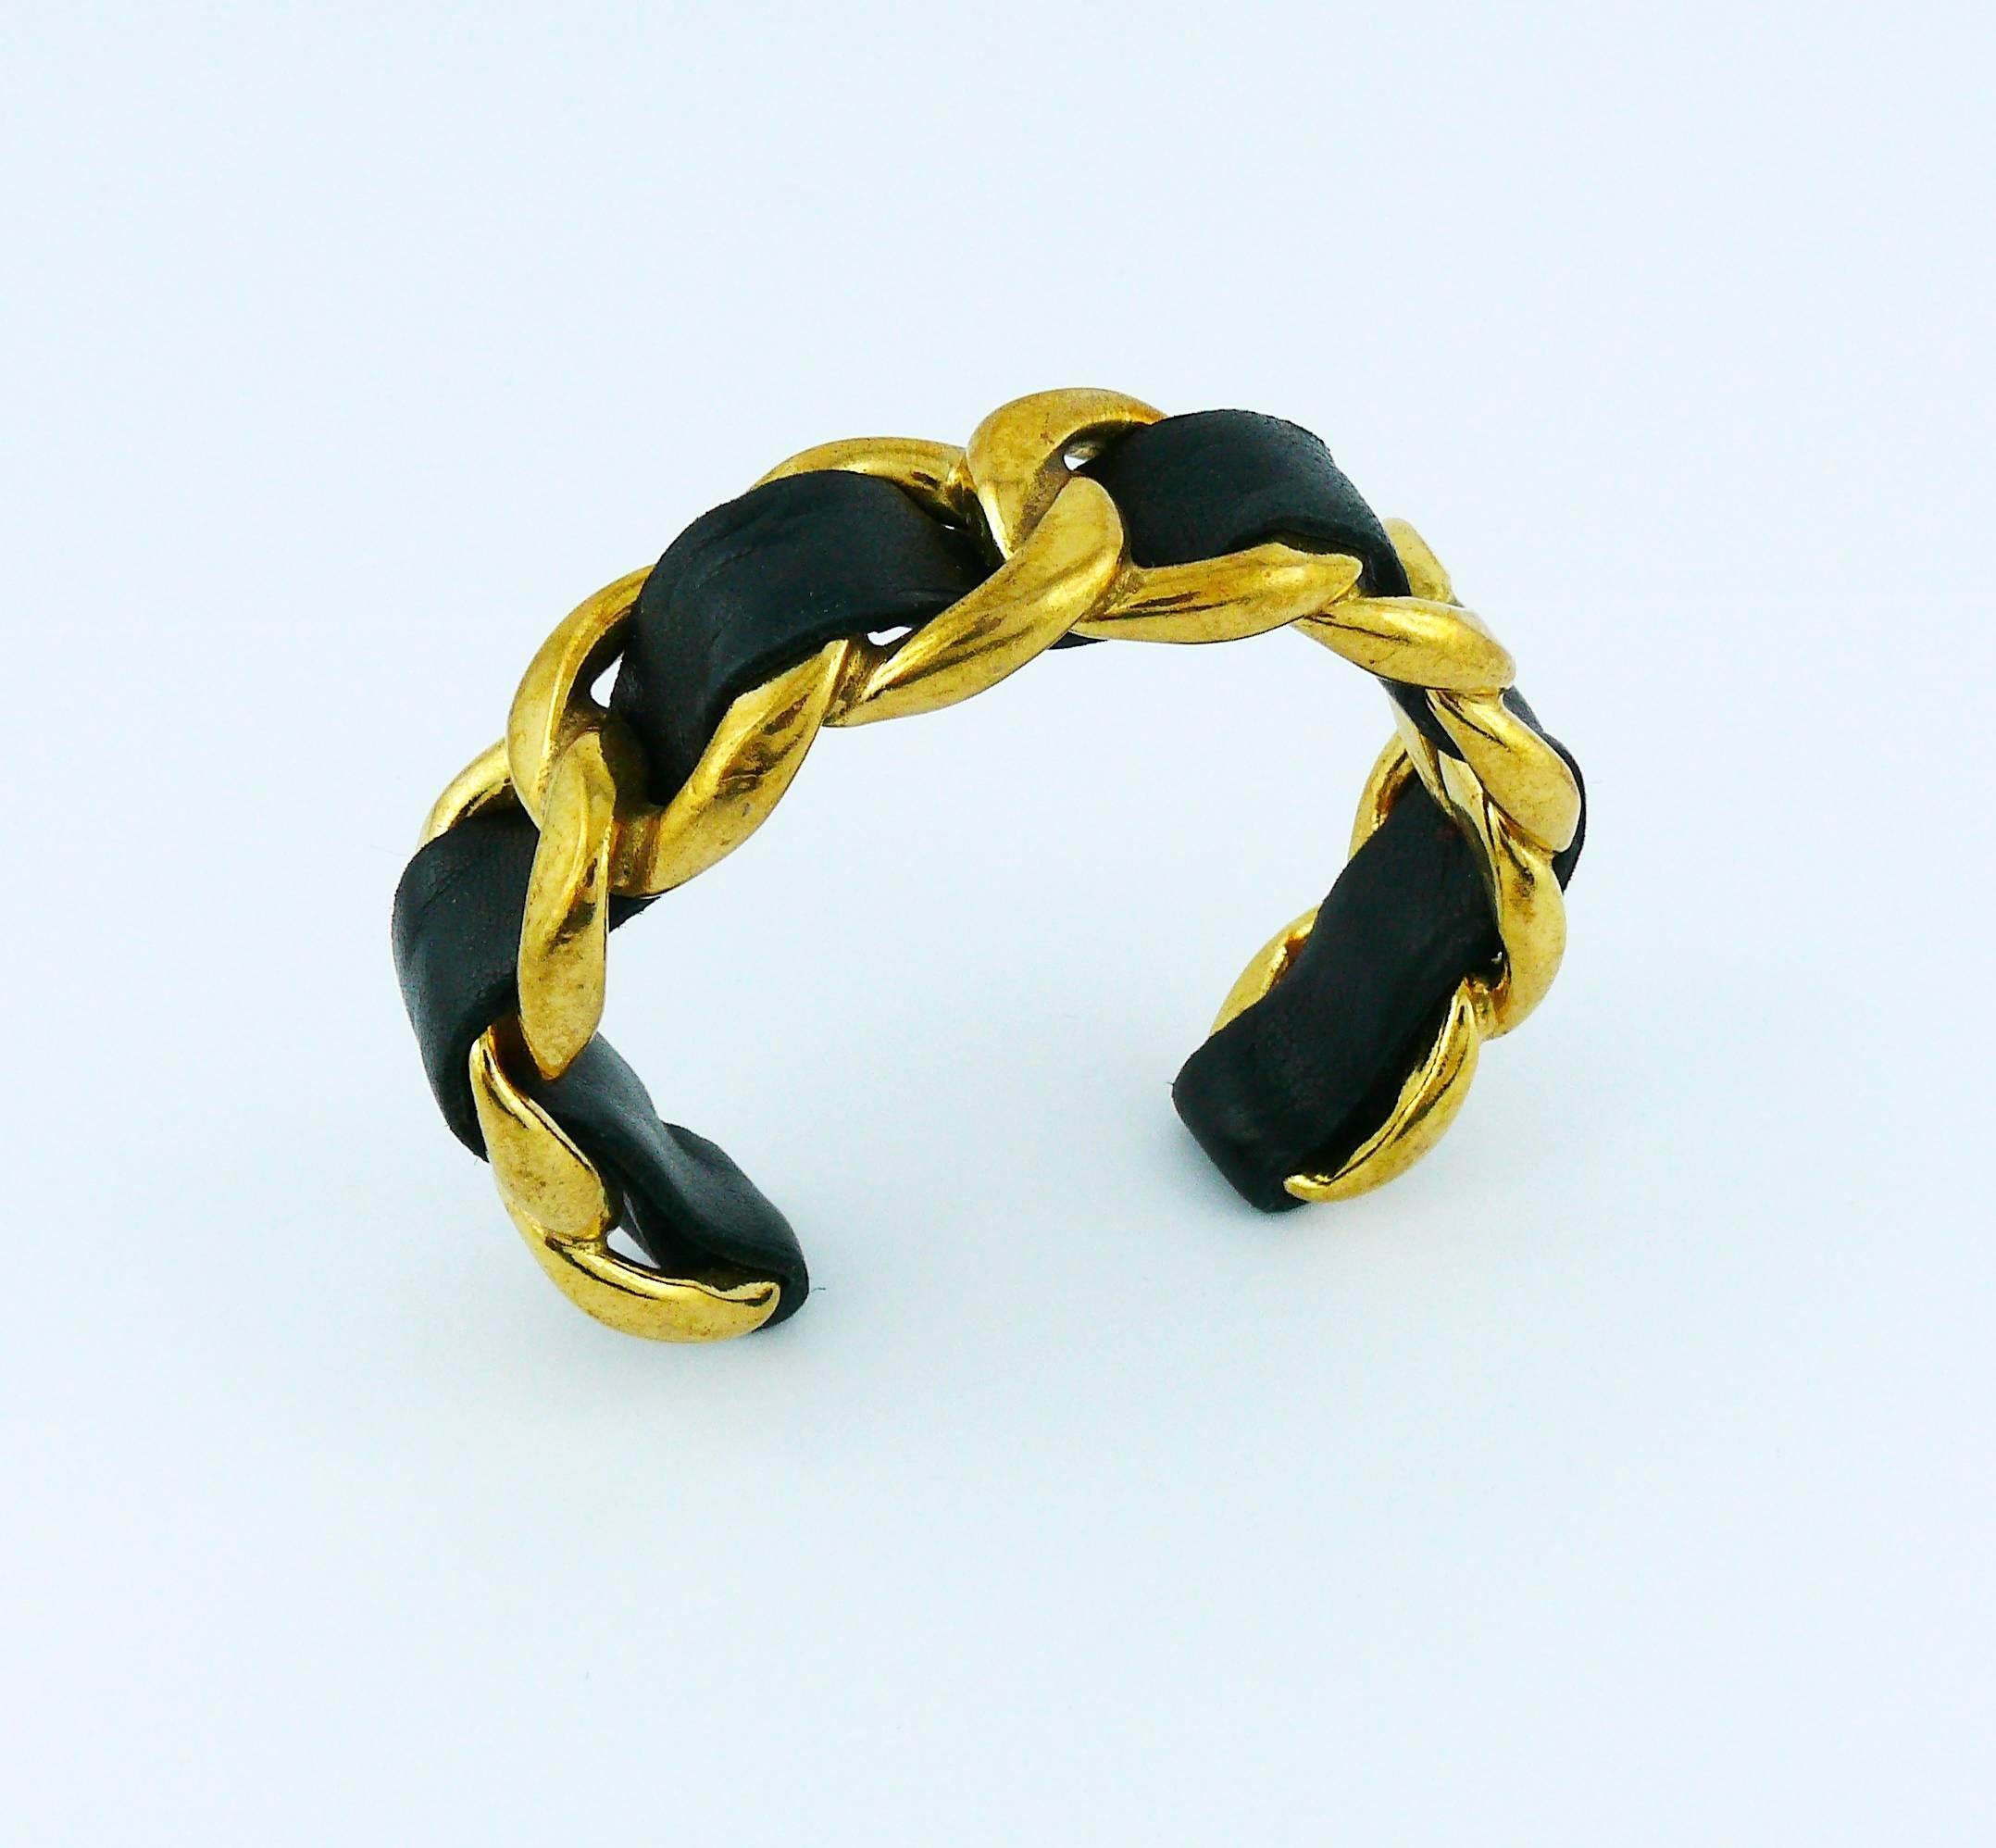 Chanel Vintage 1990 Iconic Chain and Leather Cuff Bracelet In Good Condition For Sale In Nice, FR